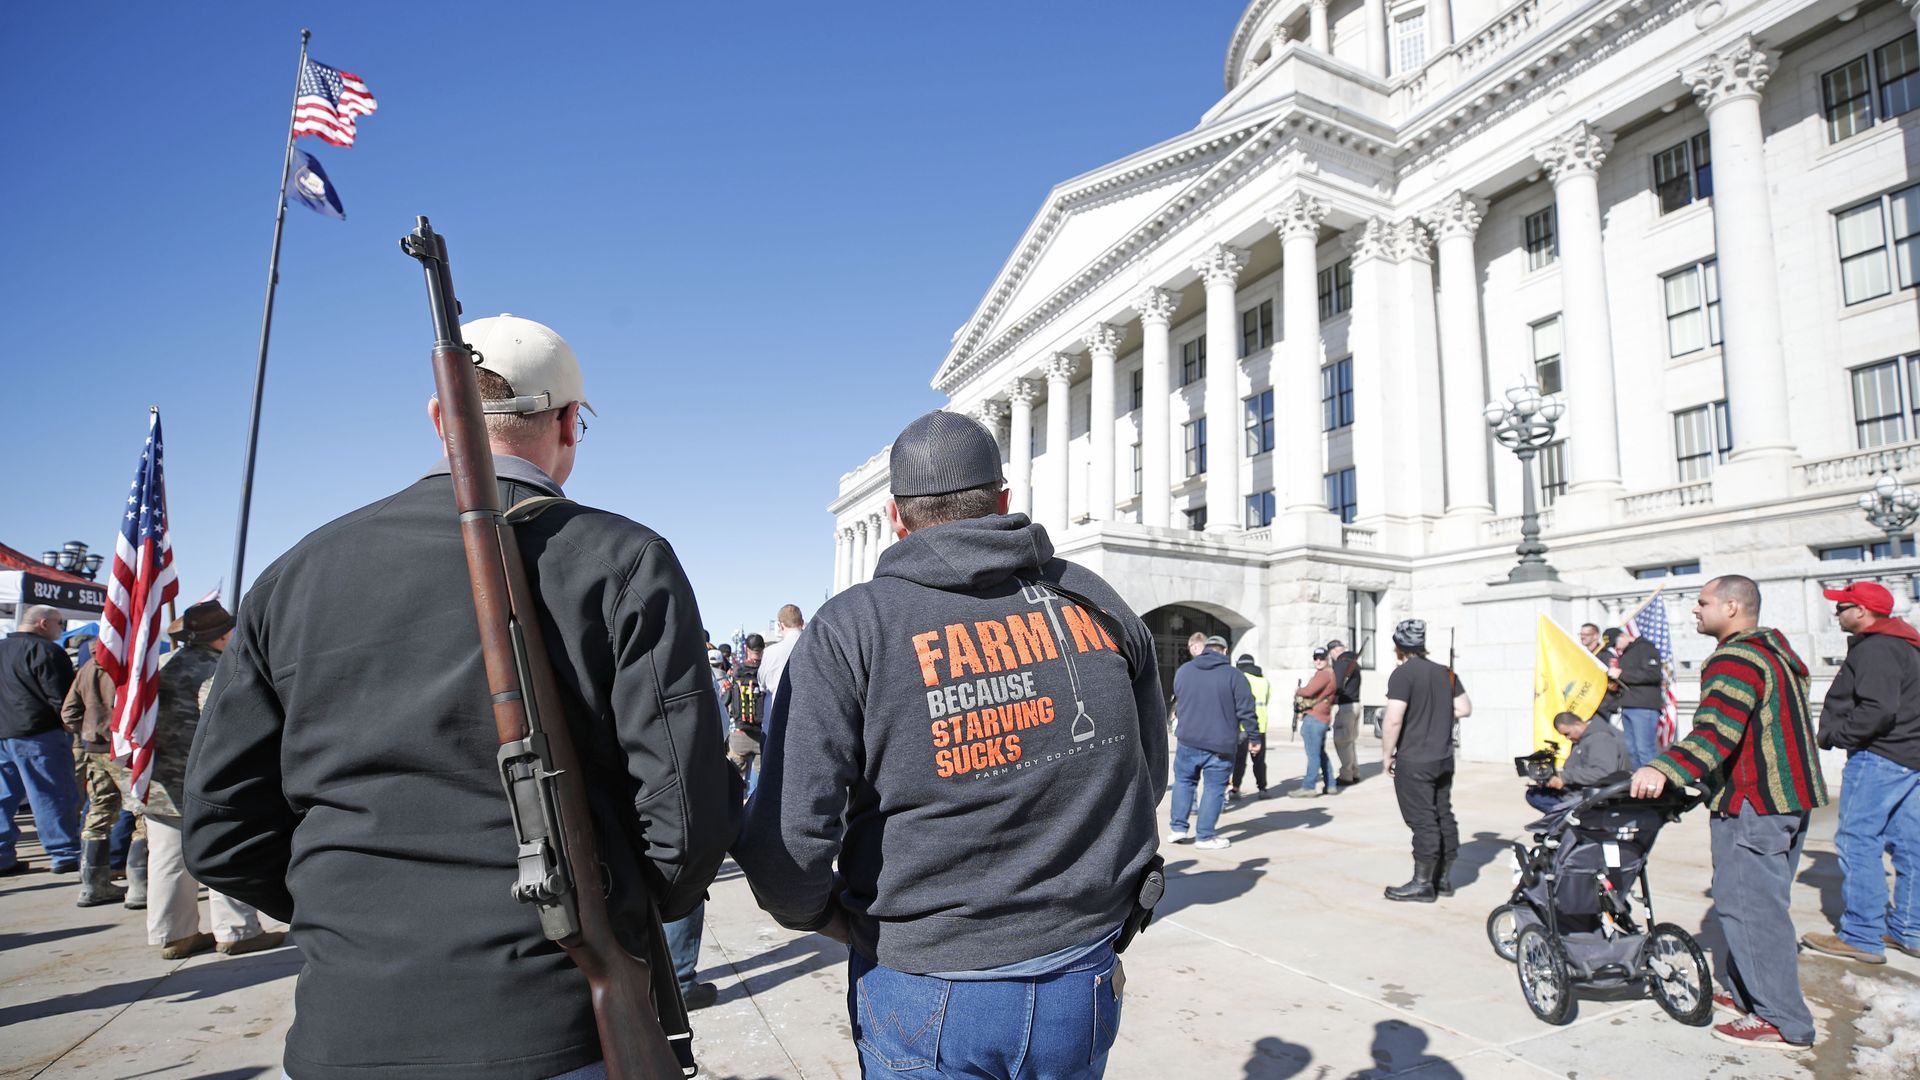  Two men with their firearms listen to speakers at a protest to new gun legislation at the Utah State Capitol in Salt Lake City, Utah on February 8, 2020. 